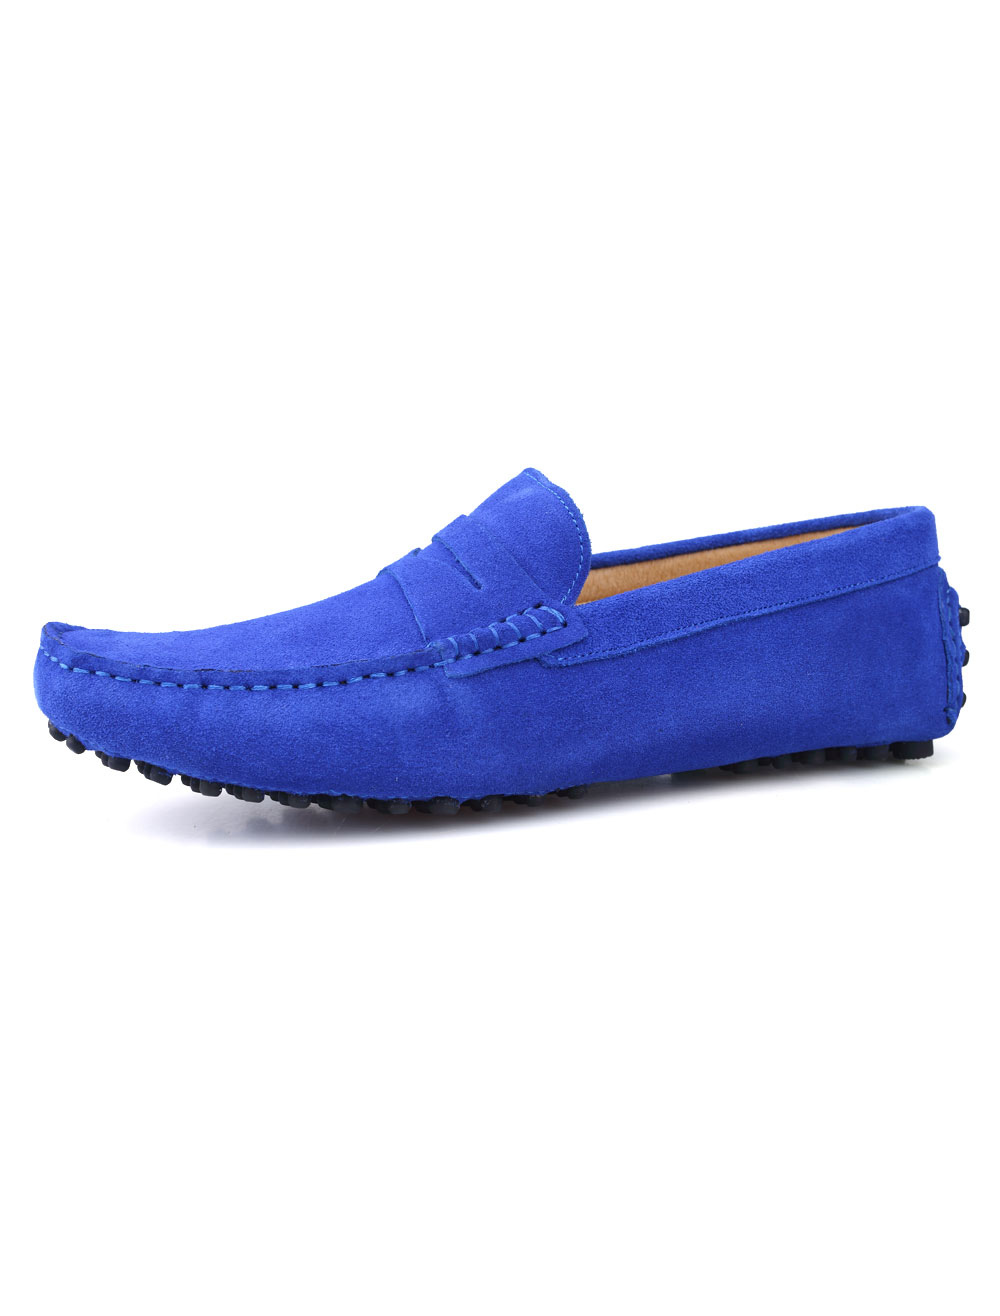 Royal Blue Cowhide Loafers Casual Shoes For Men - Milanoo.com